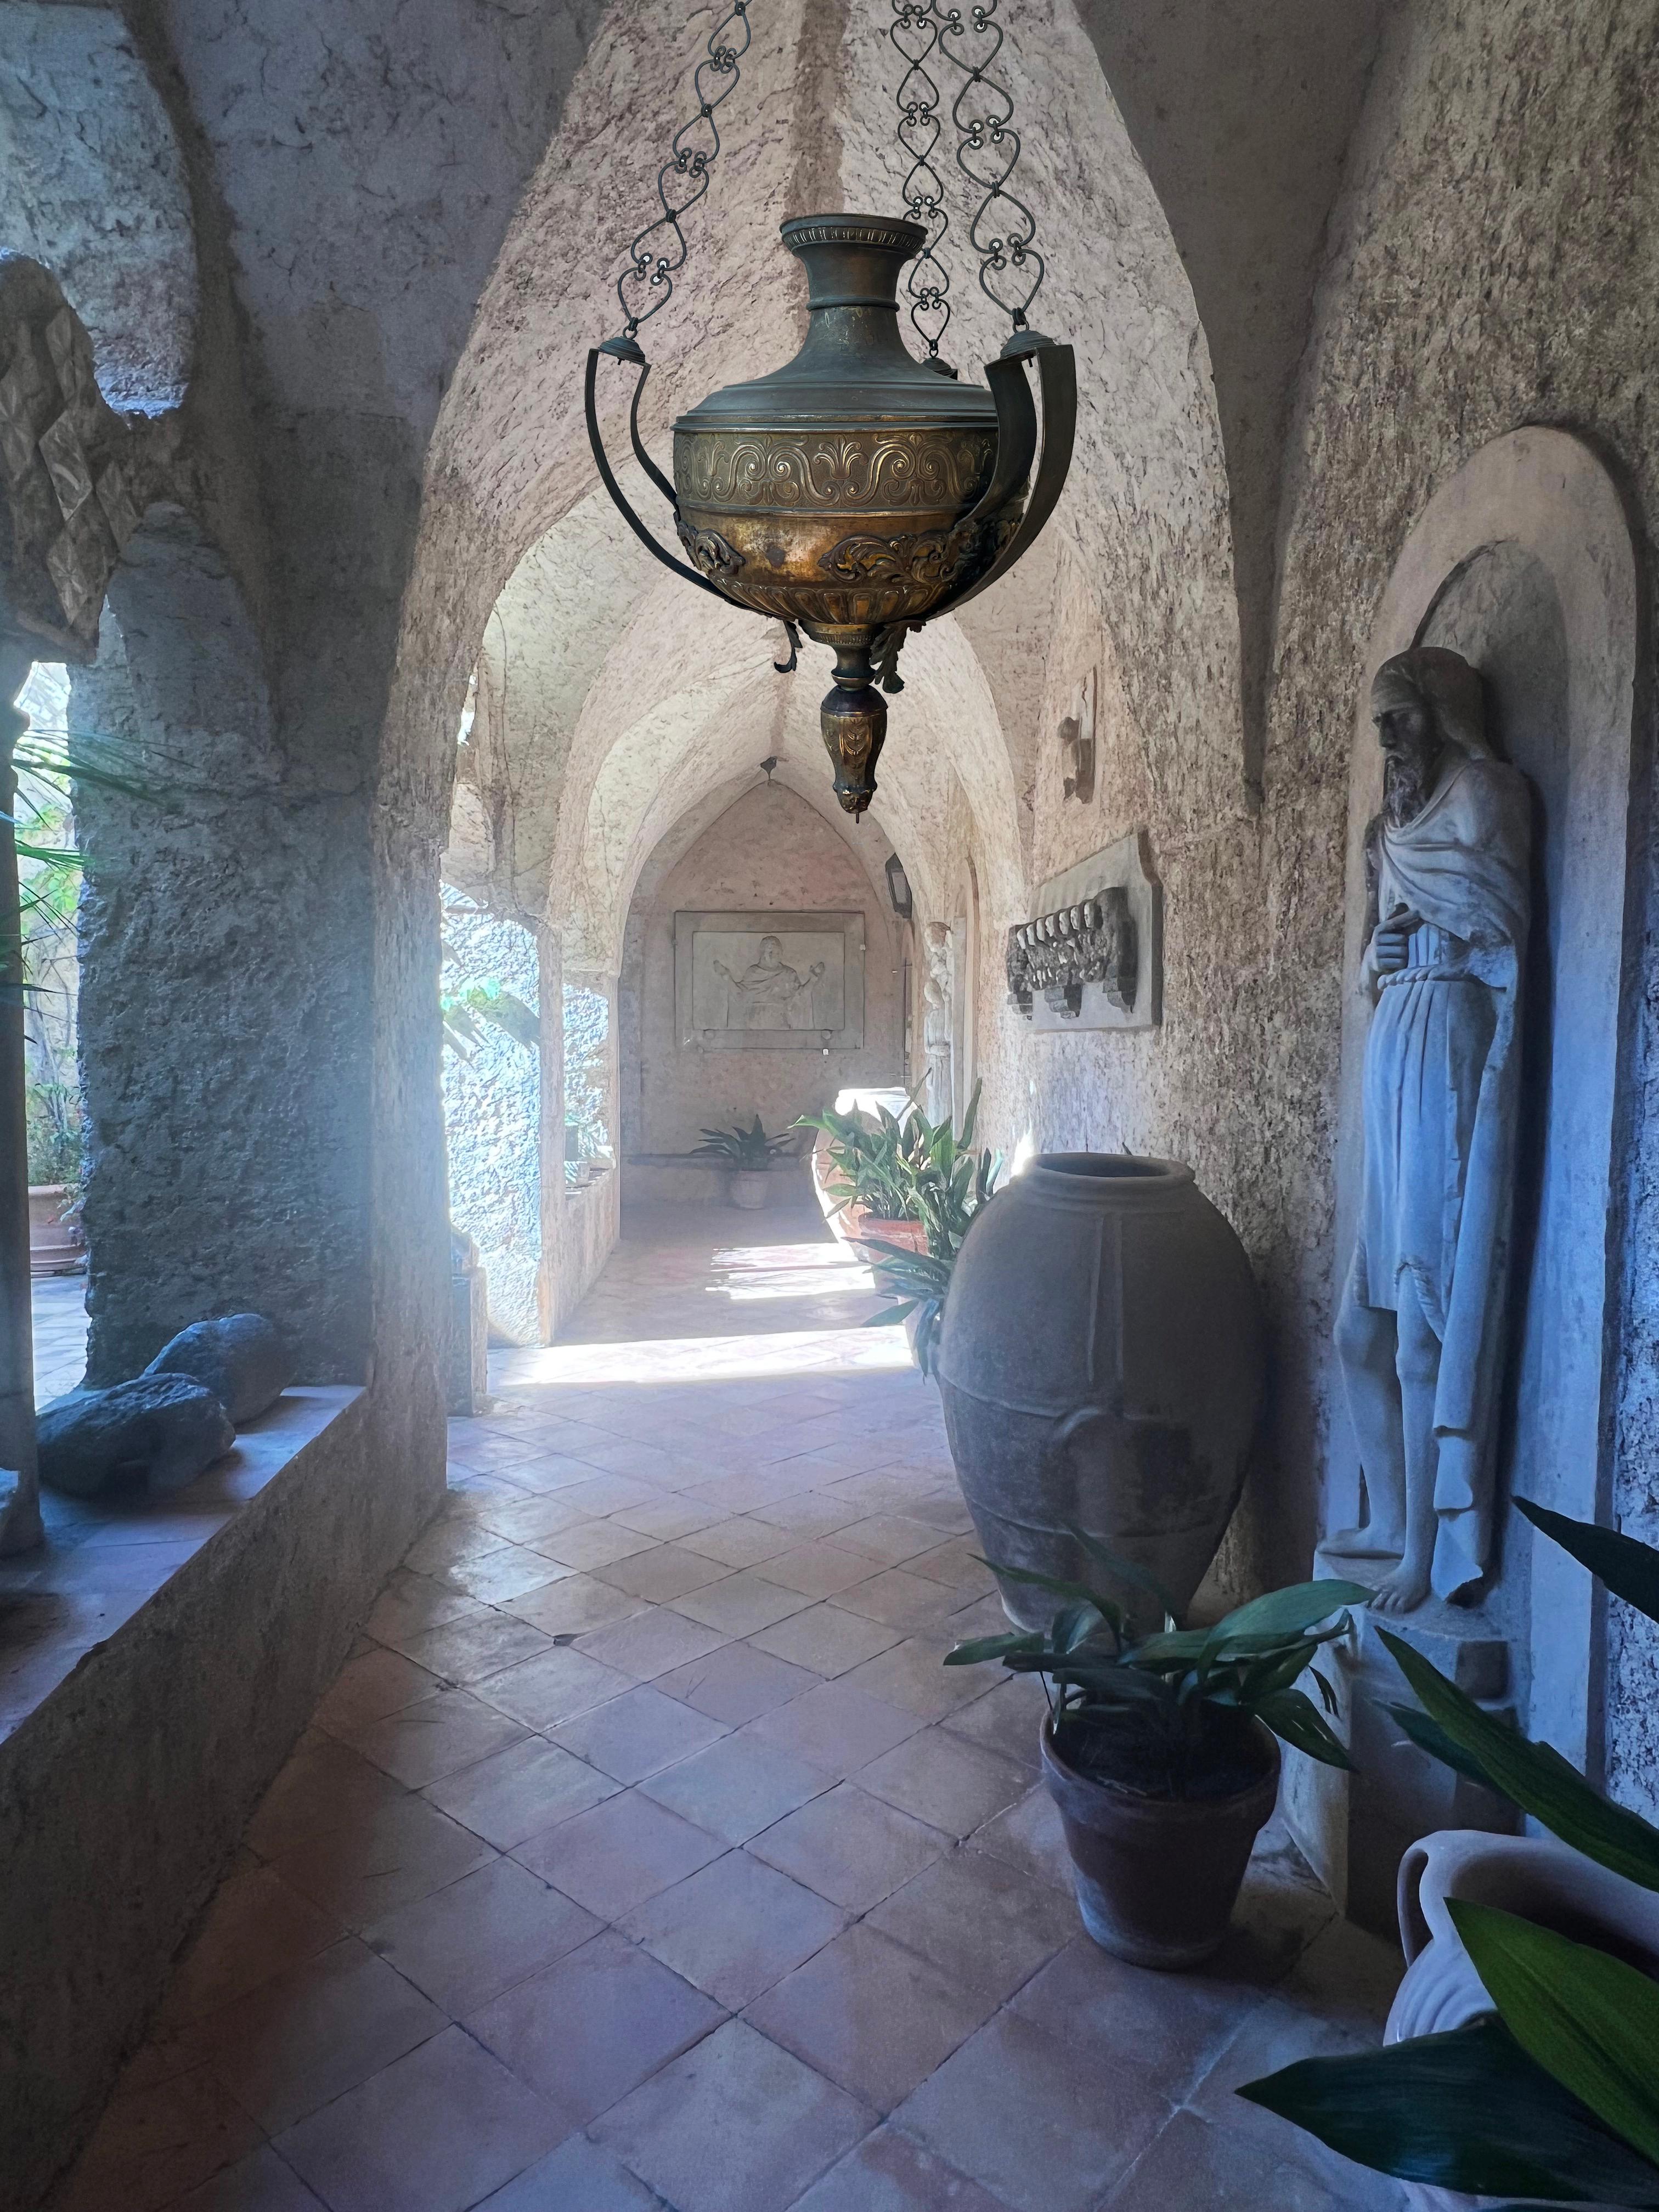 Ancient bronze lantern from a monastery of cloistered nuns located on the Amalfi coast. A candle was strung on the top, illuminating the chapel for a month. With the closure of the convent by the Jacobins, the lantern was transferred to an